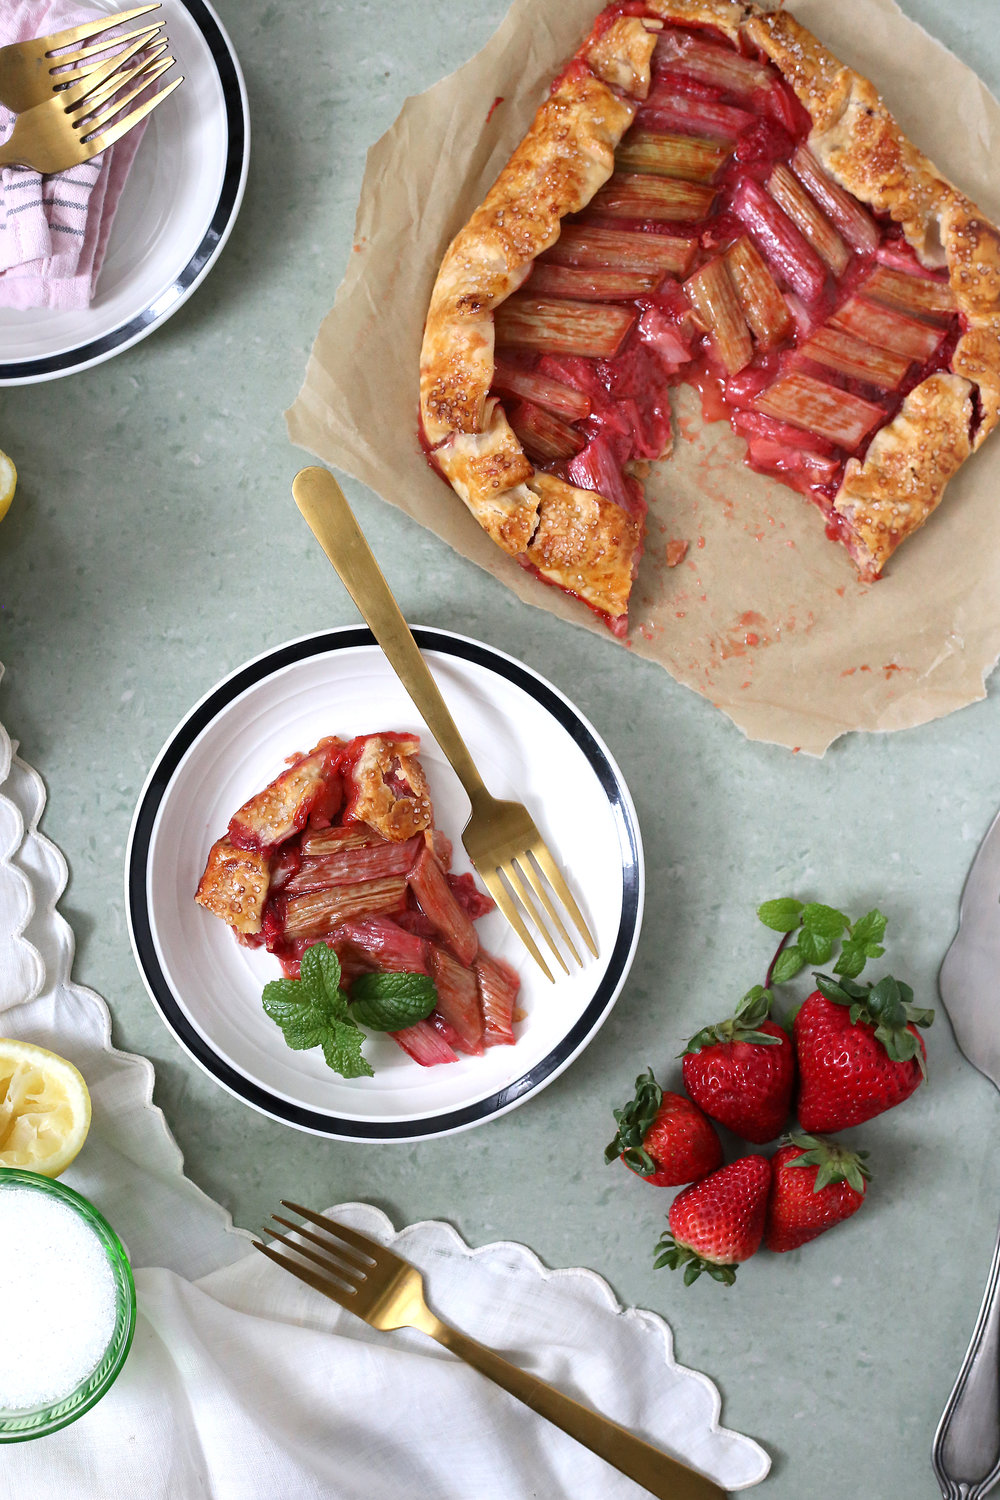 Easy as pie! Get the recipe for this Strawberry Rhubarb Galette at UnusuallyLovely.com